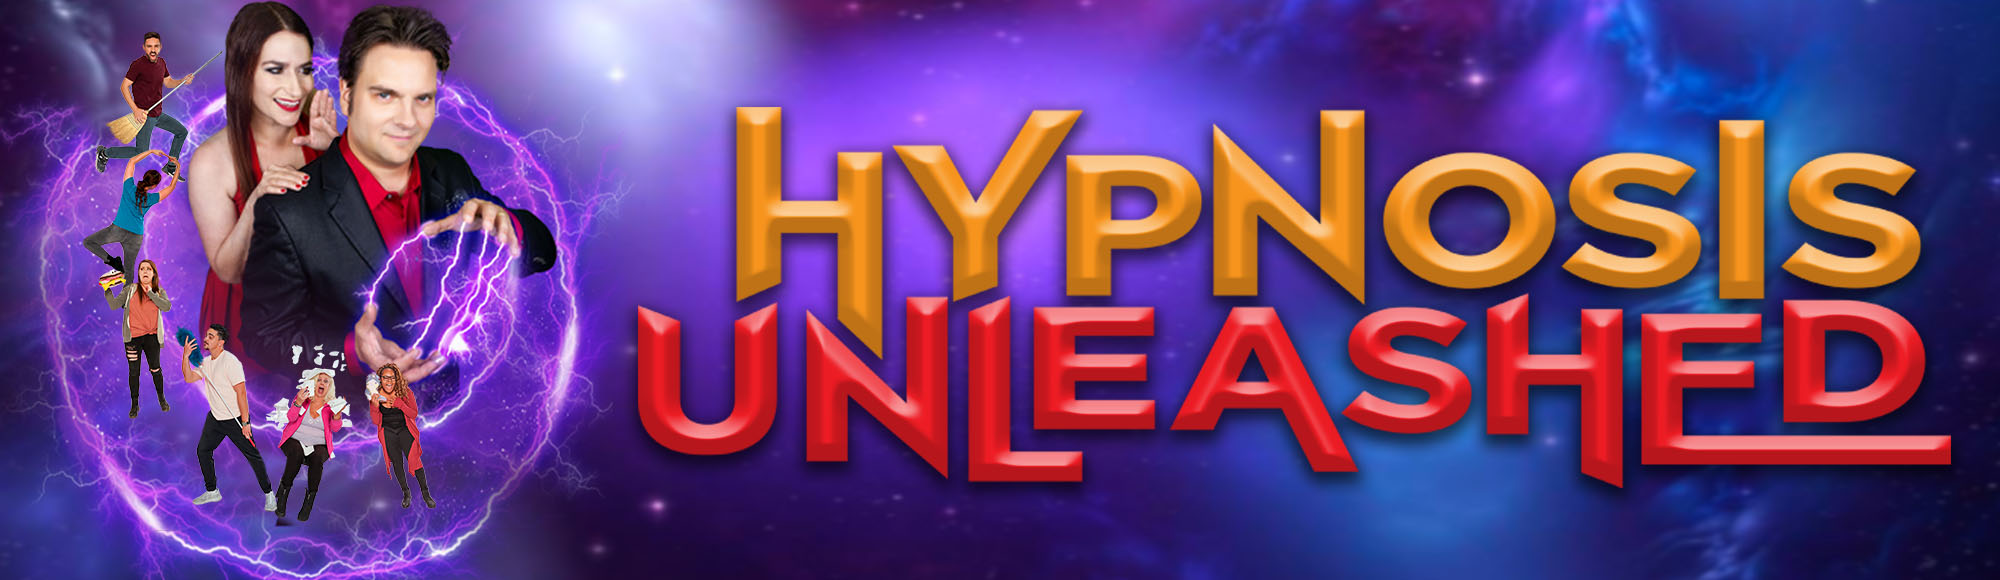 Hypnosis Unleashed Starring Kevin Lepine show